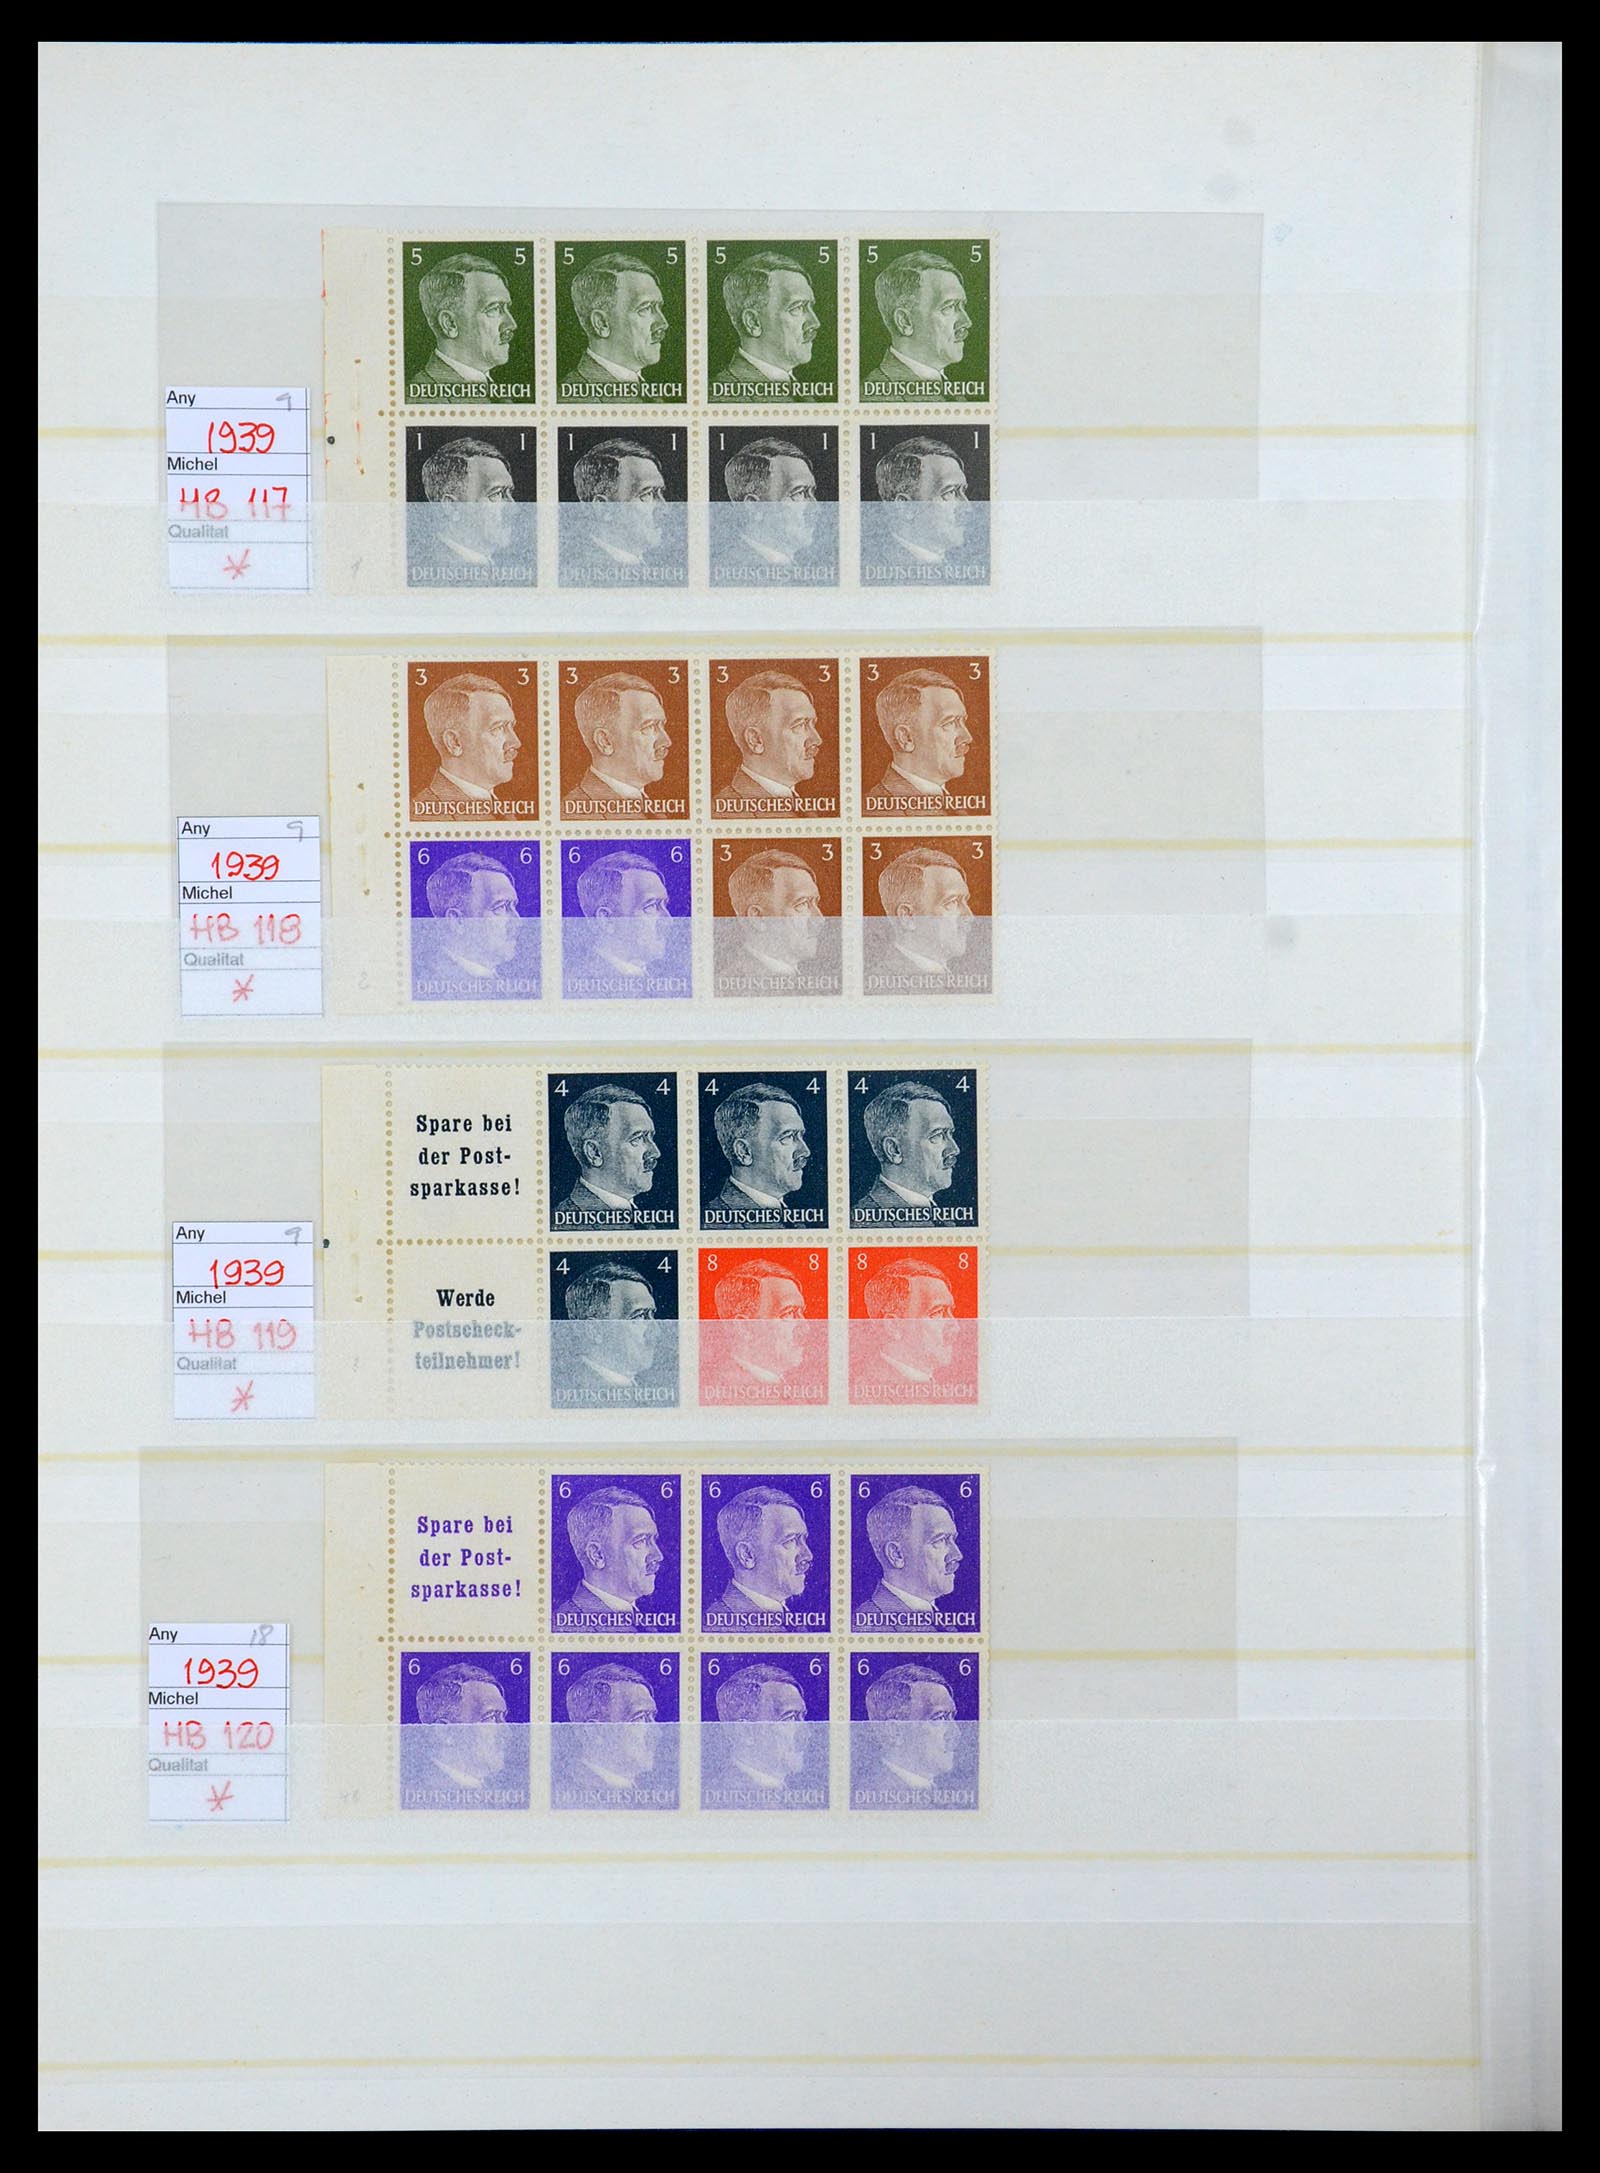 35875 016 - Stamp Collection 35875 German Reich booklet panes 1927-1939.